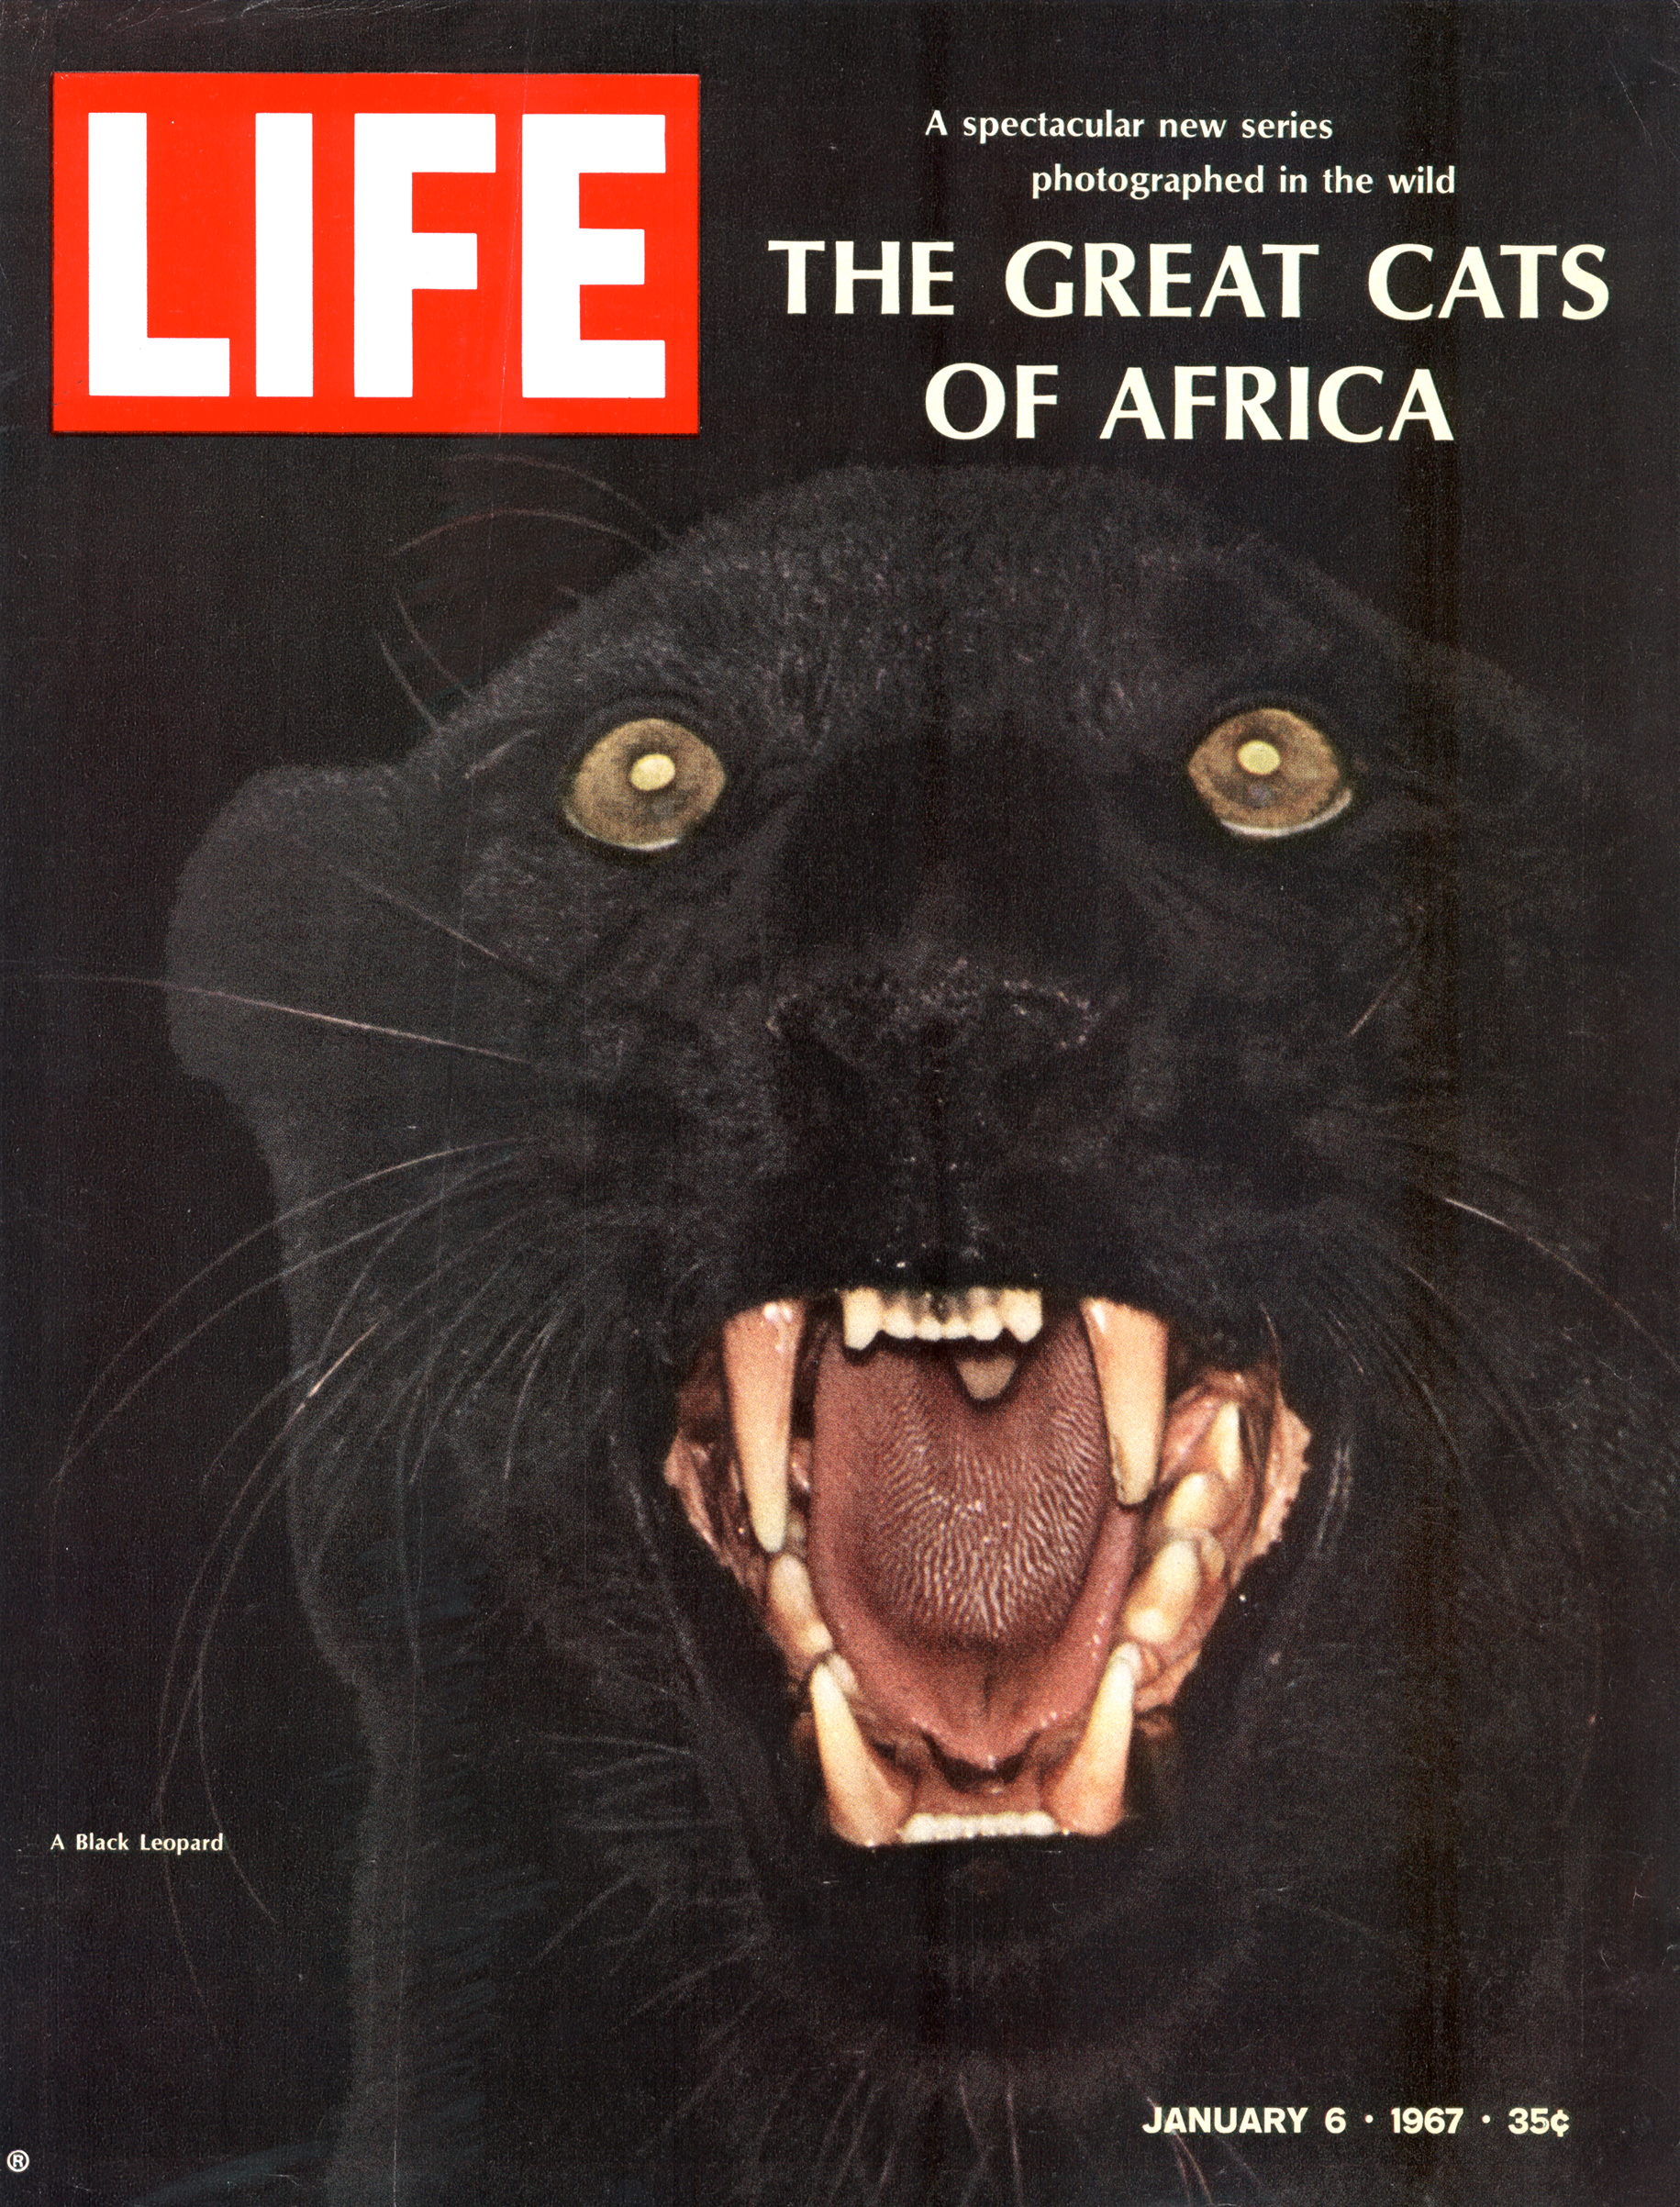 Jan. 6, 1967 cover of LIFE magazine, Great Cats of Africa by John Dominis